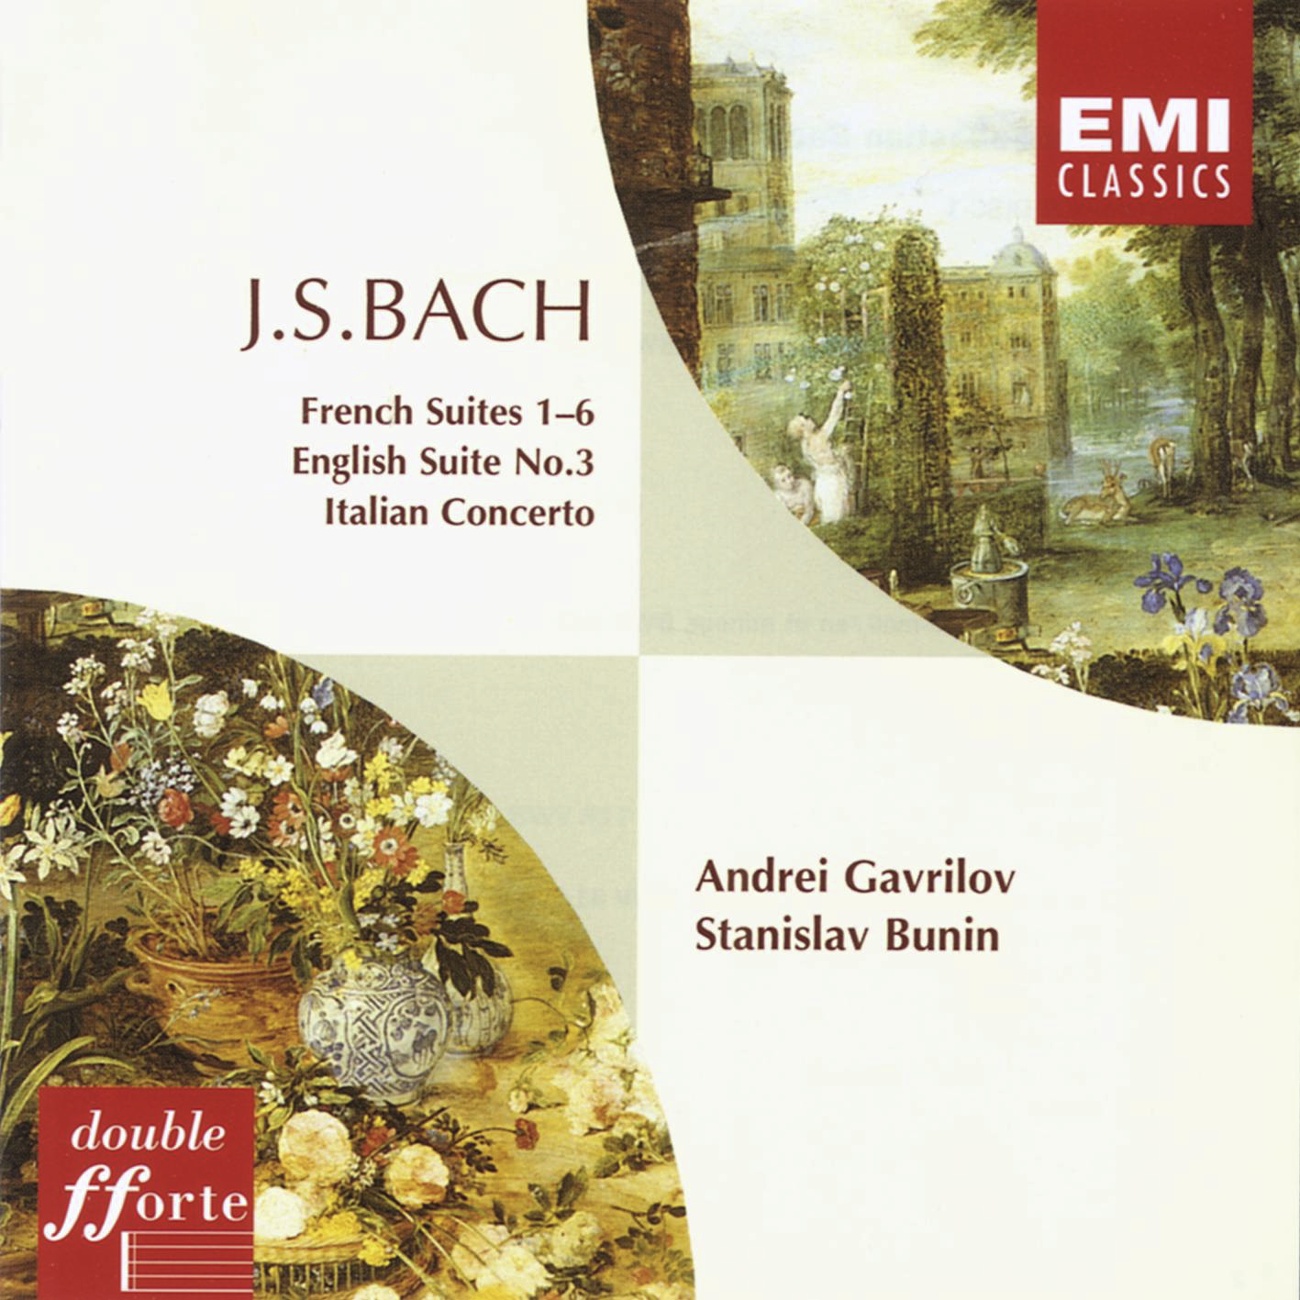 BACH: ENGLISH SUITE 3 IN G-MIN, BWV 808: II. ALLEMANDE